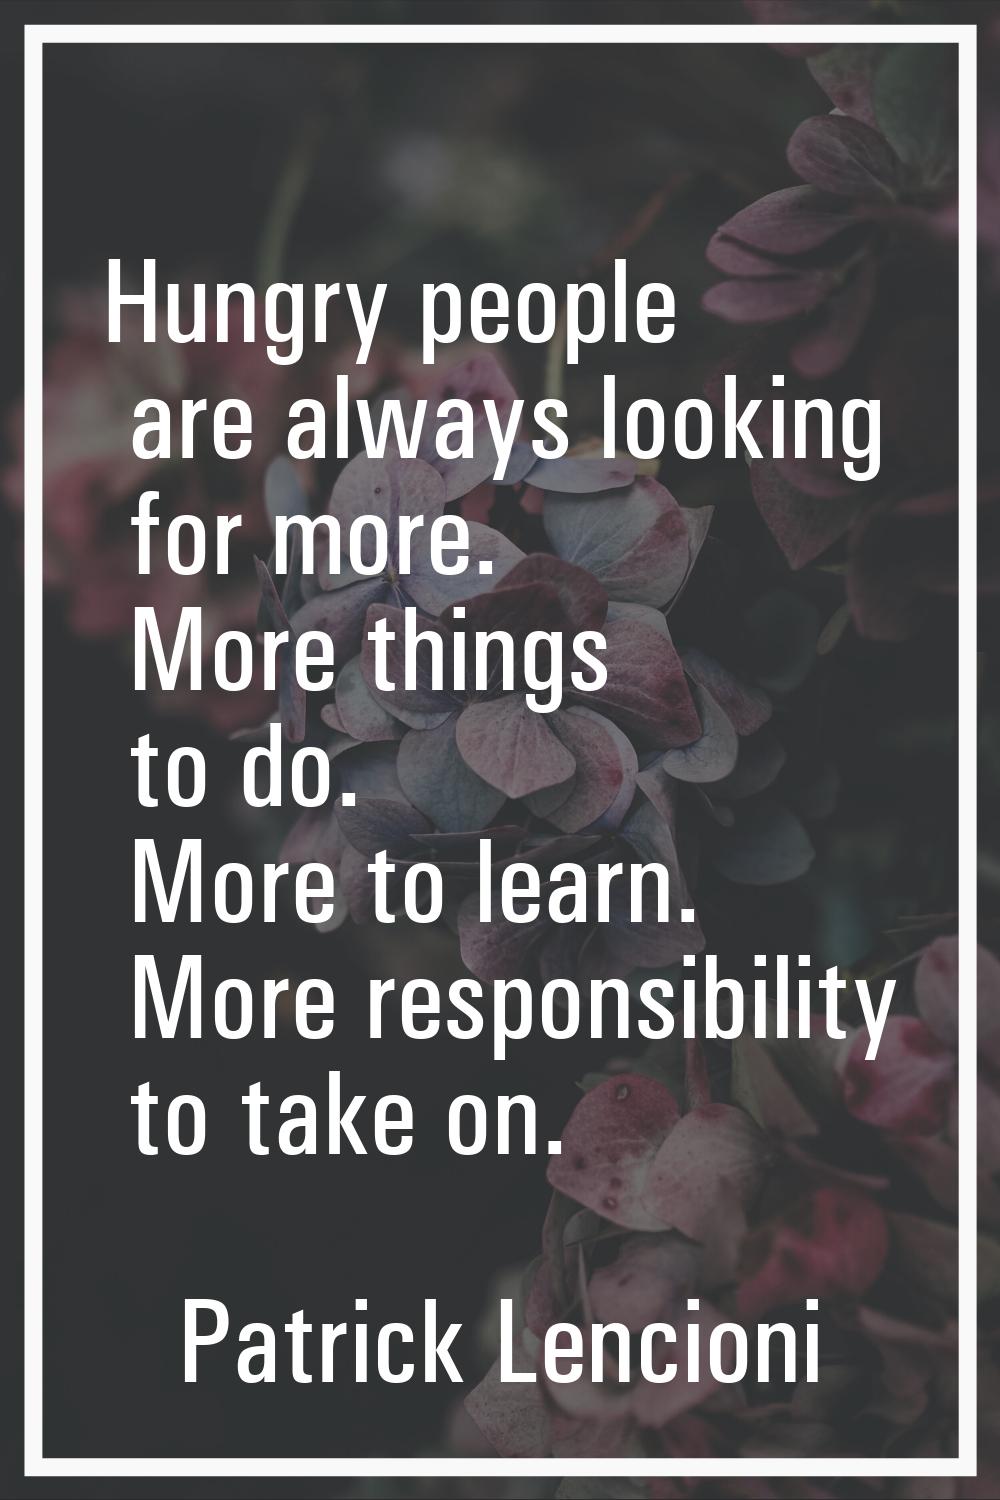 Hungry people are always looking for more. More things to do. More to learn. More responsibility to